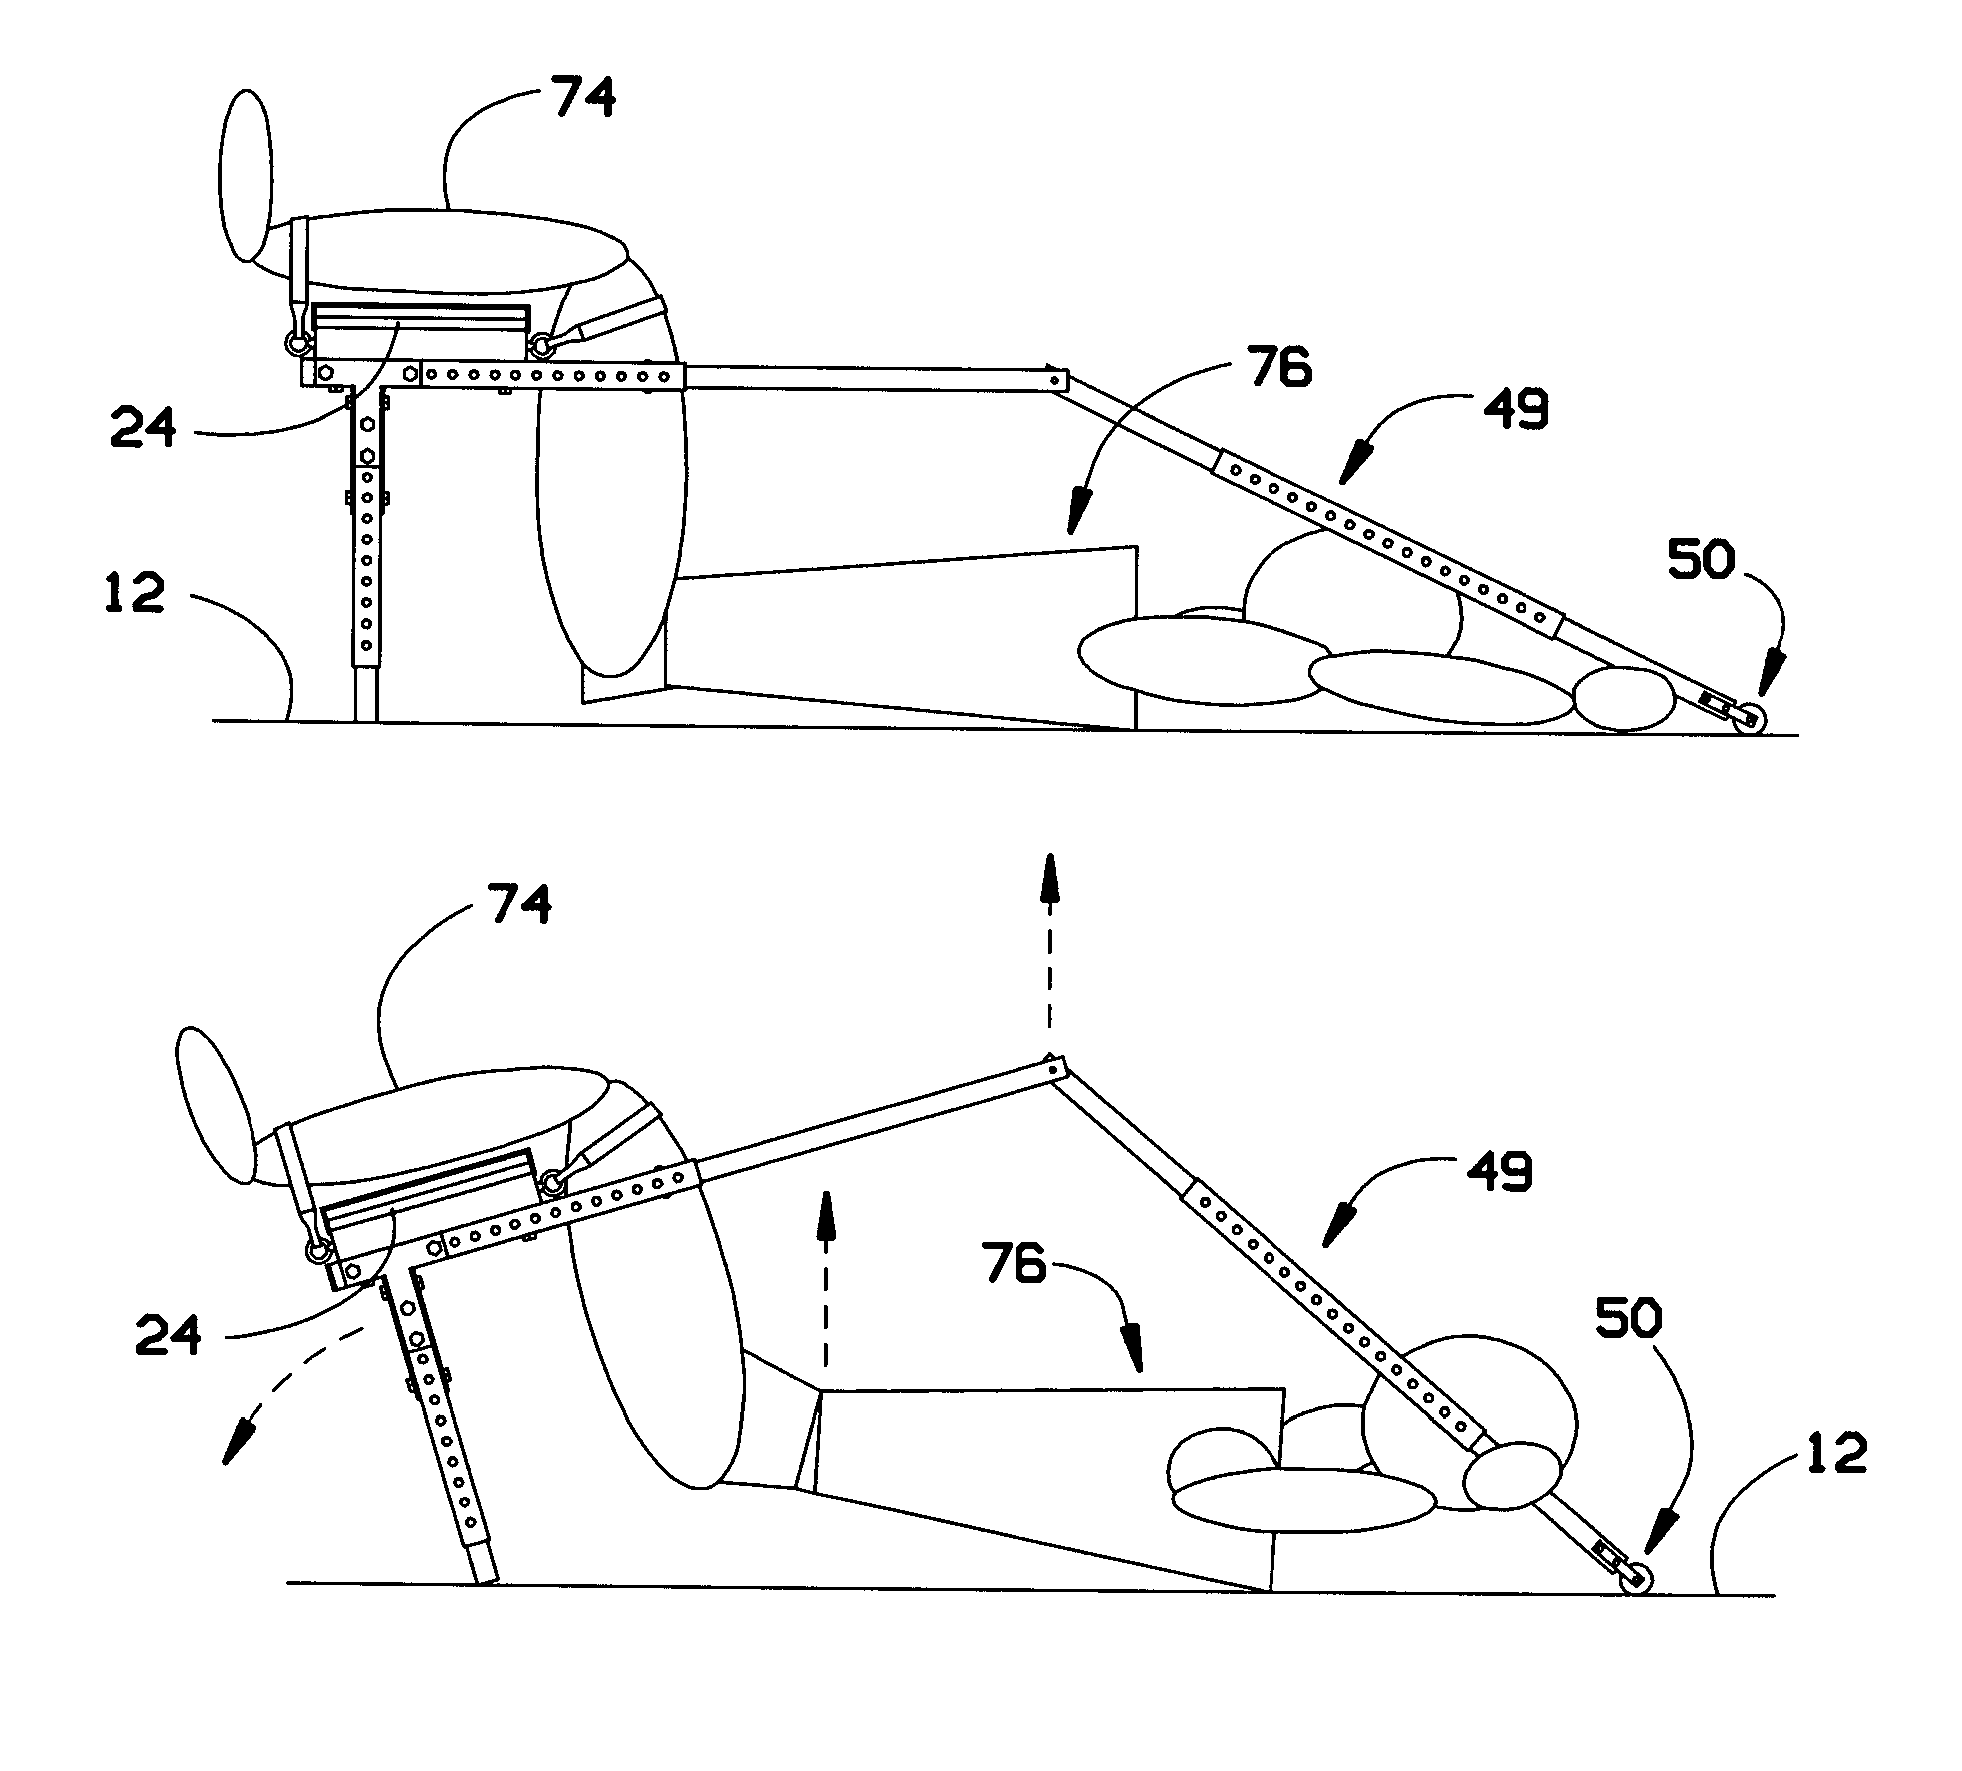 Self-operating back stretching device